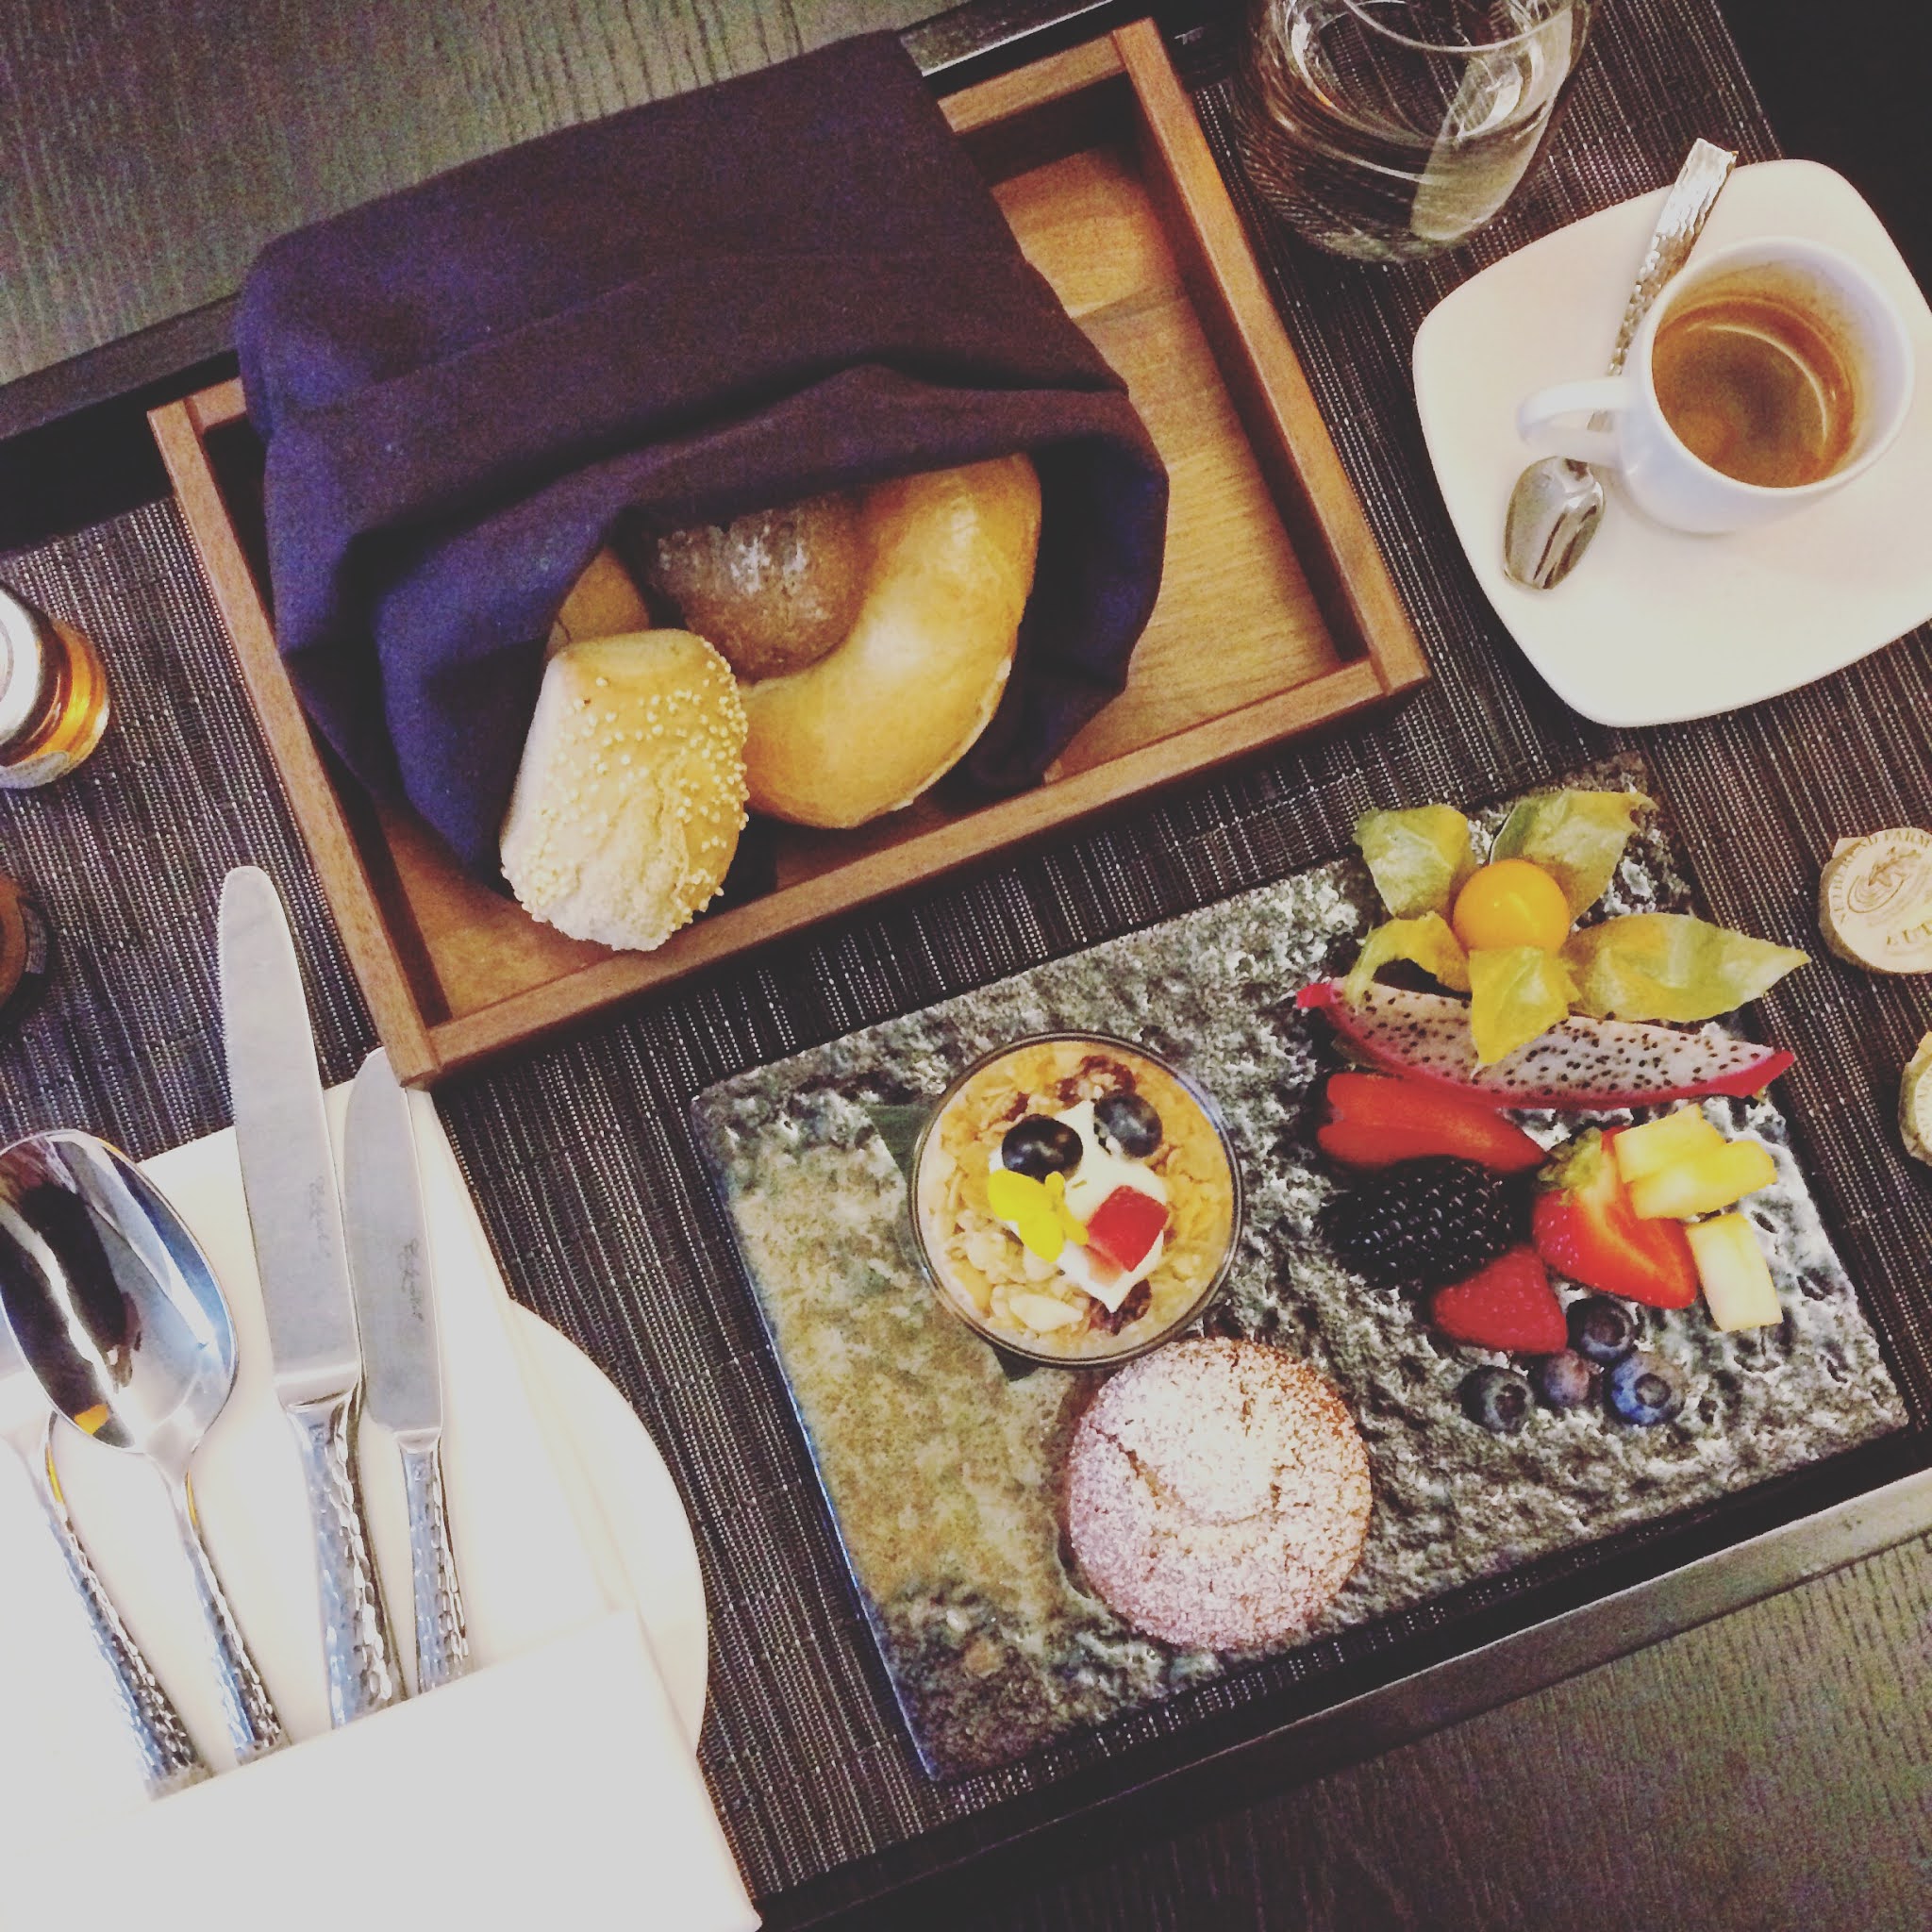 A continental breakfast of bread, pastries and fruits on a wooden tray in a bedroom at the Nobu Shoreditch Hotel, one of the best places for an early london breakfast